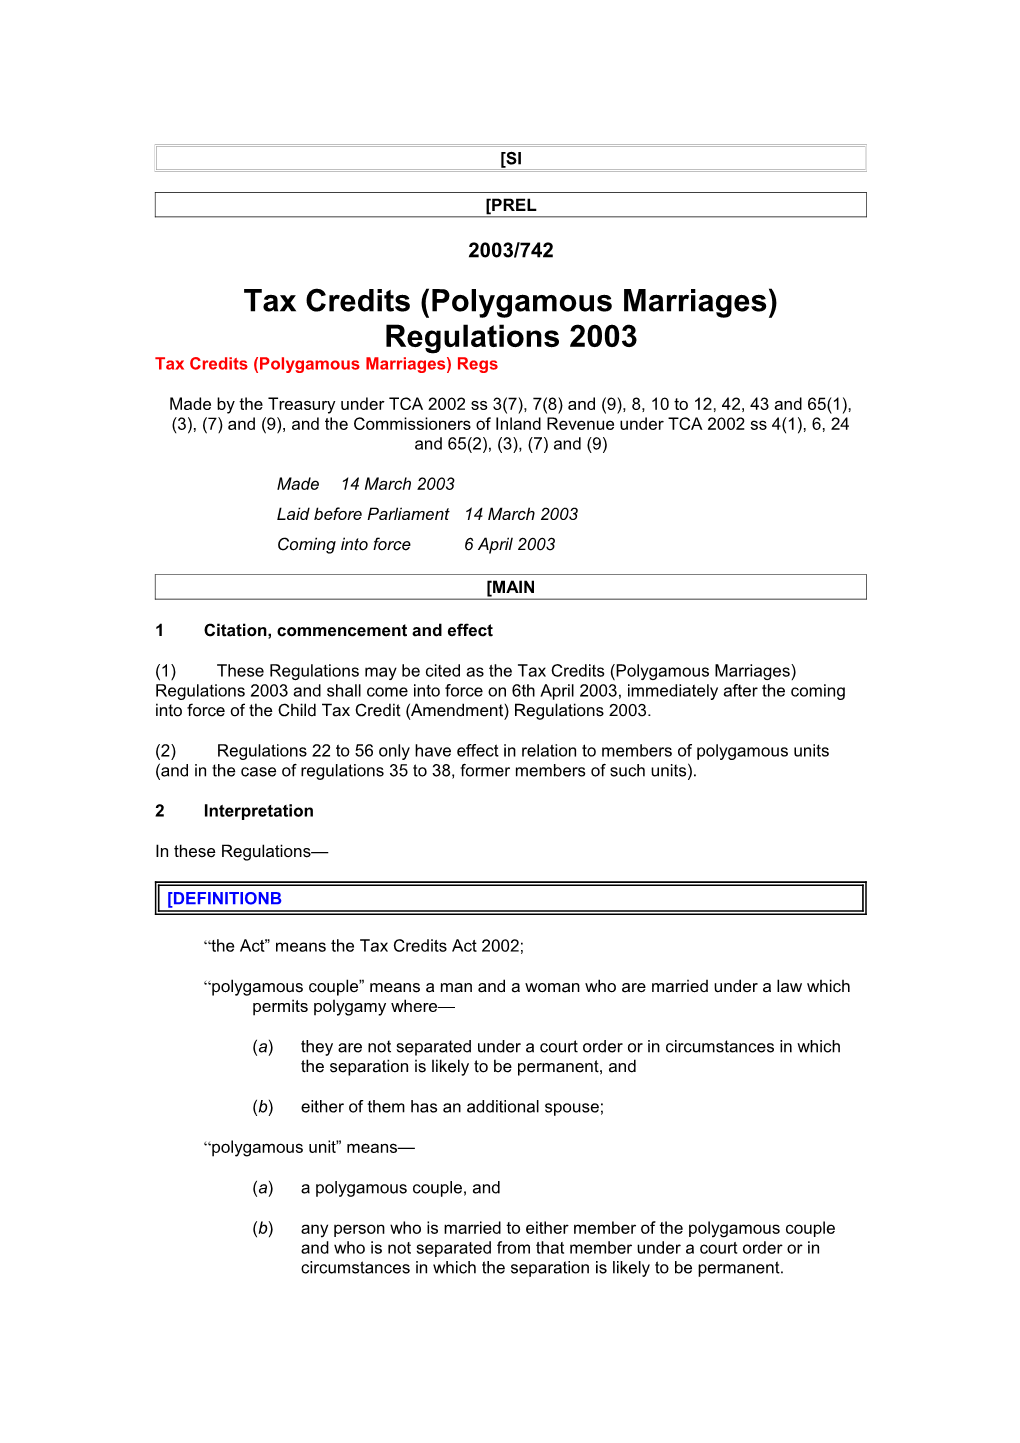 Tax Credits (Polygamous Marriages) Regulations 2003 s1